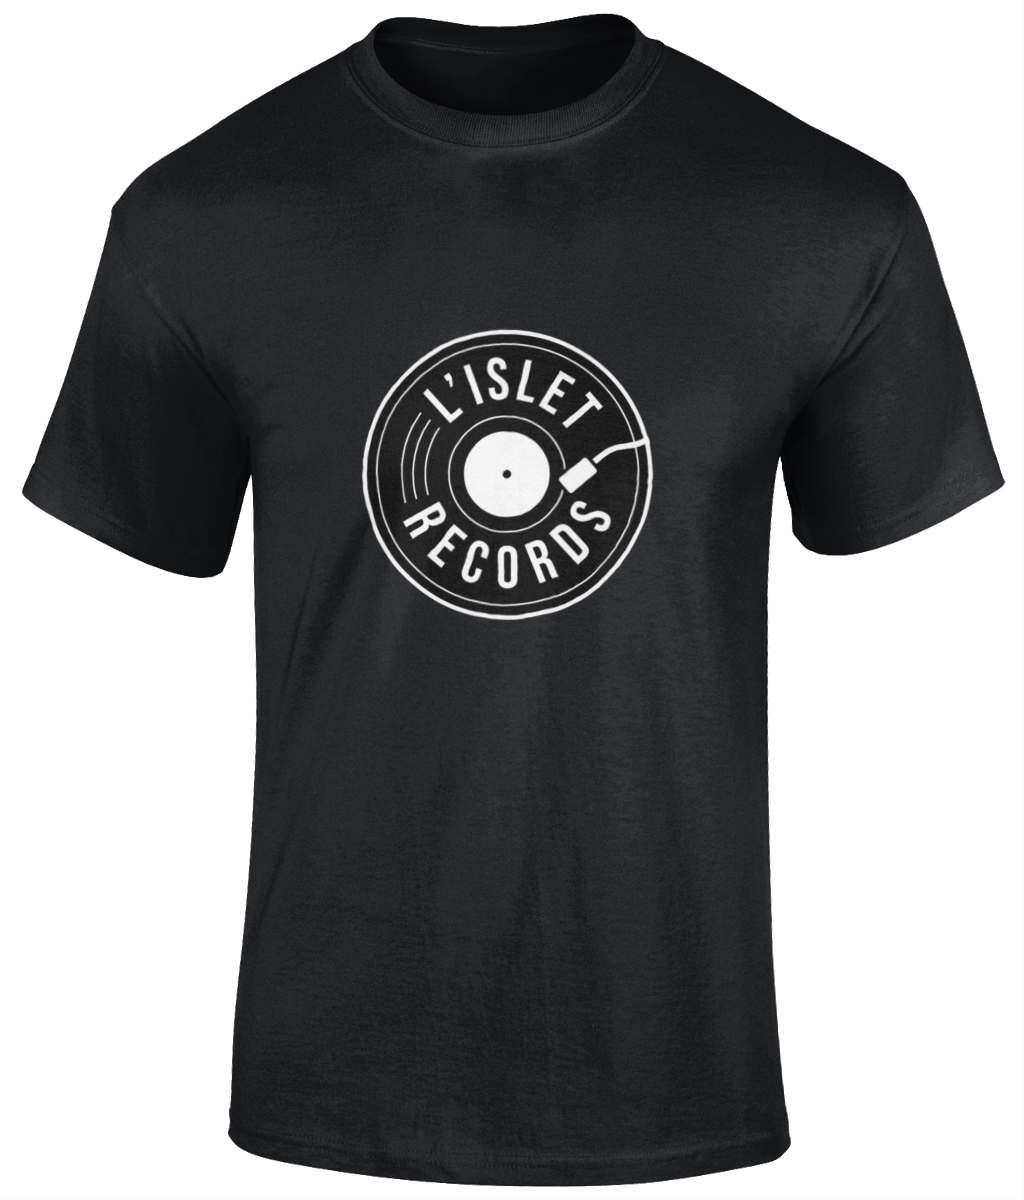 Black unisex t shirt with L'iSLET RECORDS logo  Material: 100% cotton.  Seamless twin needle collar. Taped neck and shoulders. Tubular body. Twin needle sleeves and hem. Black Sizes:  S, M, L,  XL,  2XL,  3XL,  4XL,  5XL